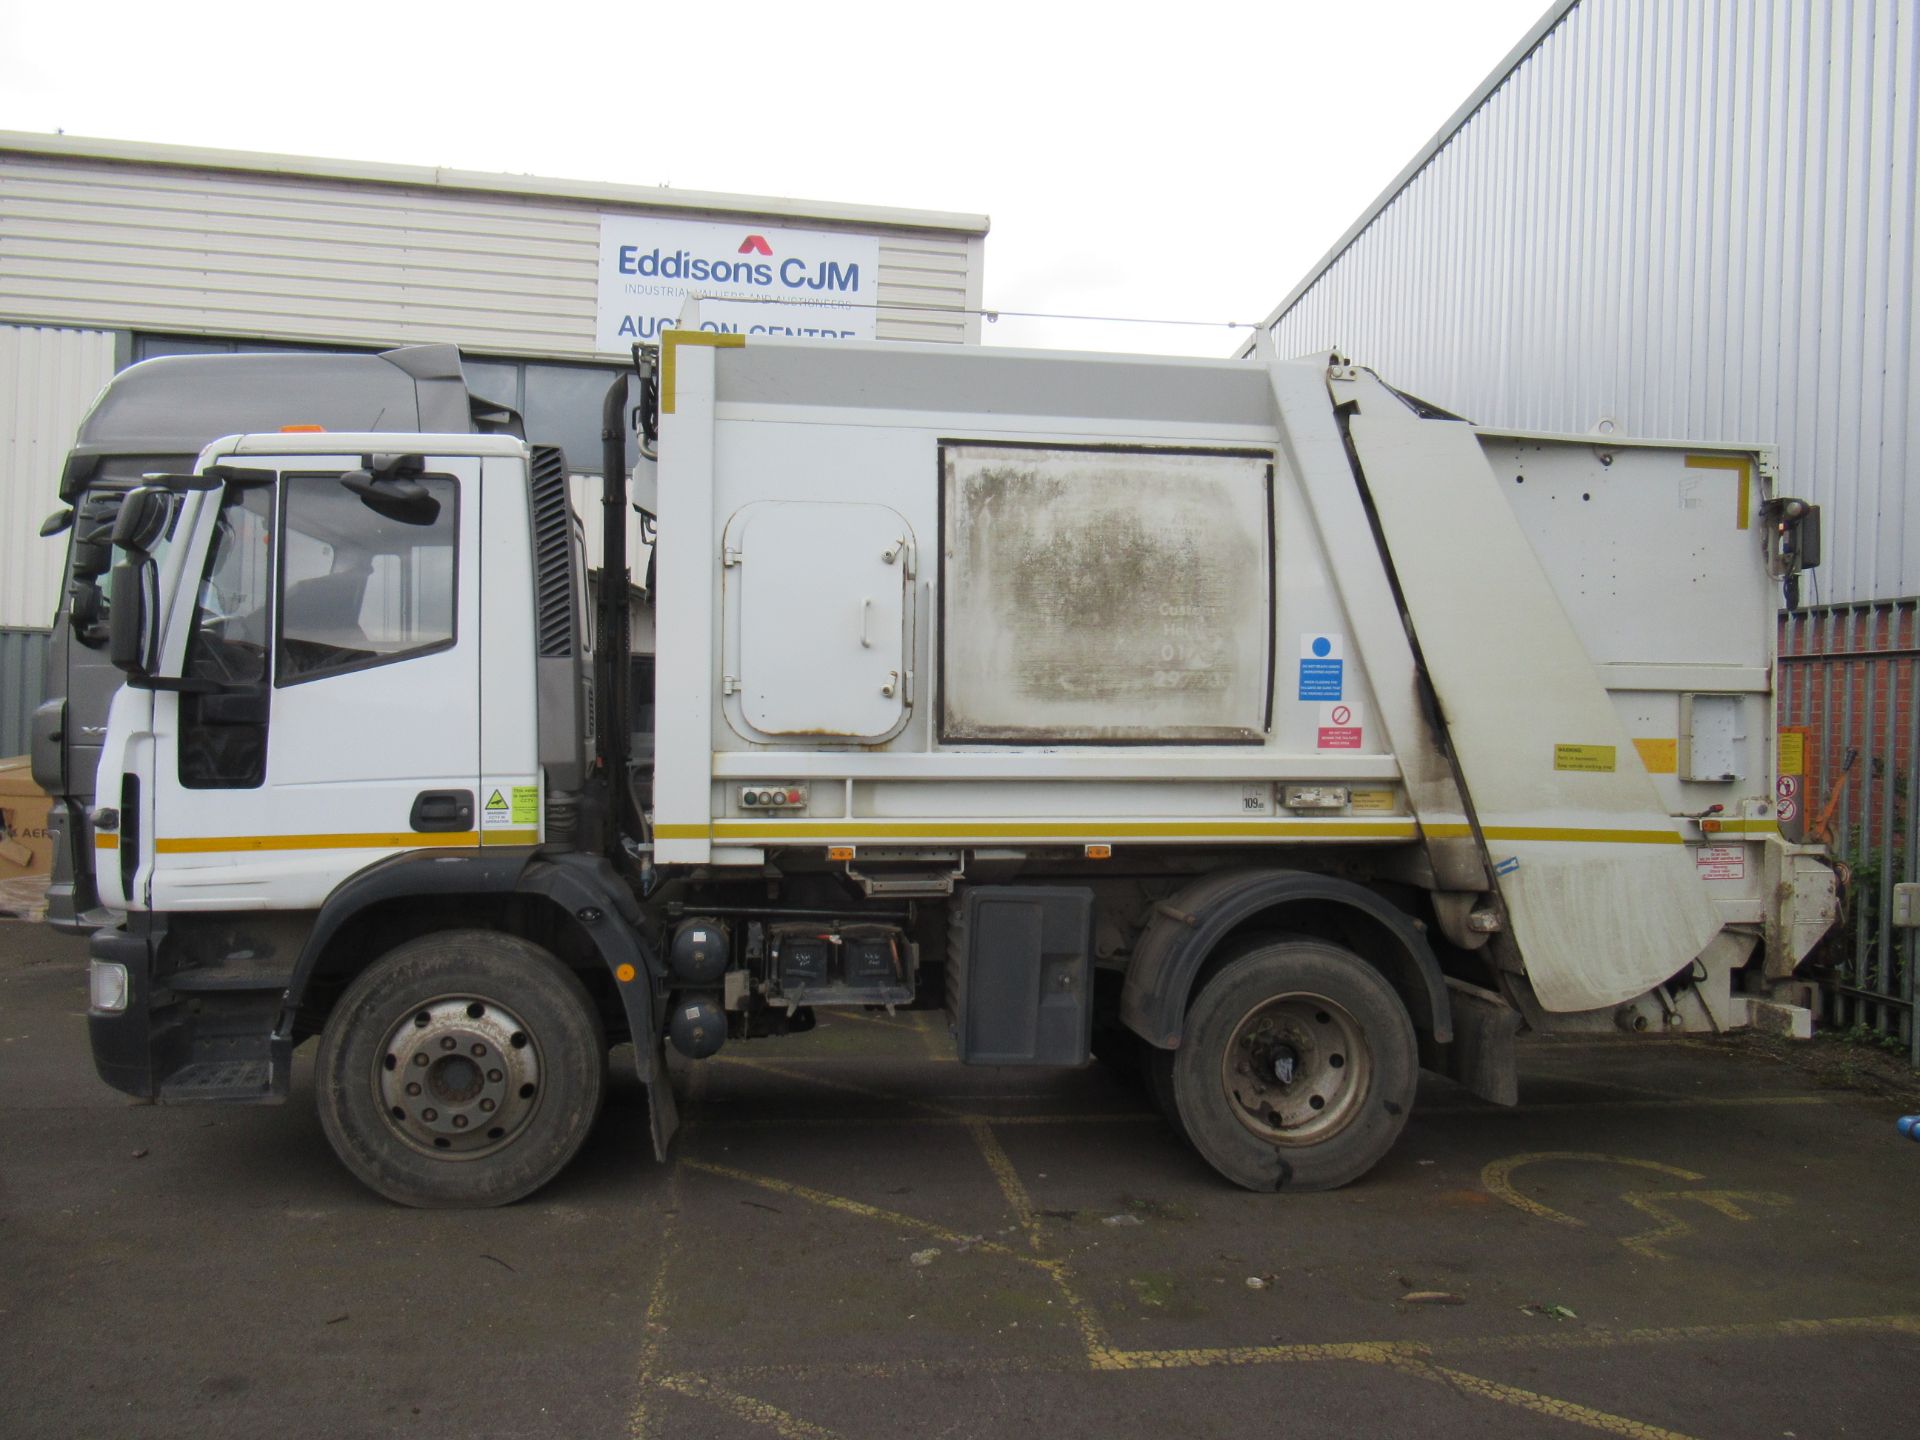 2013 WHITE IVECO EUROCARGO (MY 2008) Refuse Collection Vehicle - Image 3 of 12